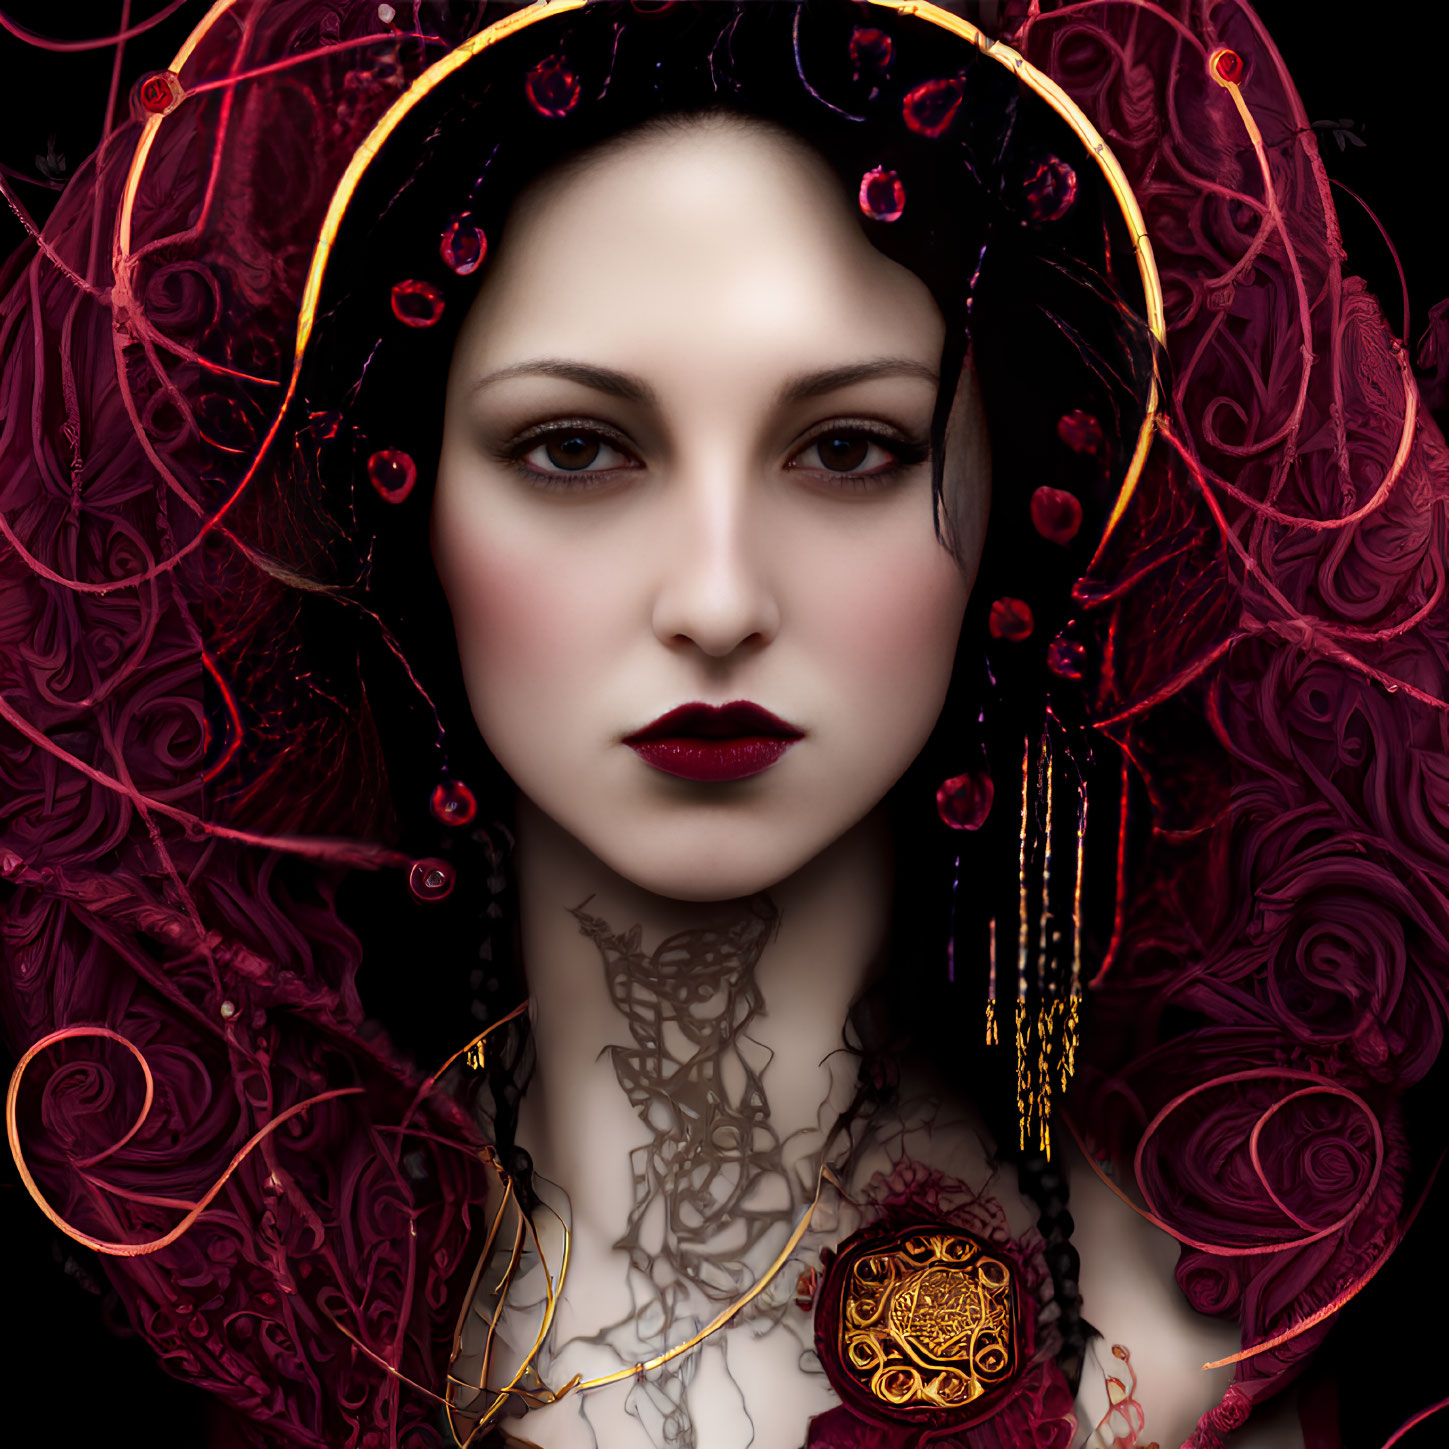 Pale woman with dark hair, red lipstick, ornate headpiece, pendant necklace on dark background